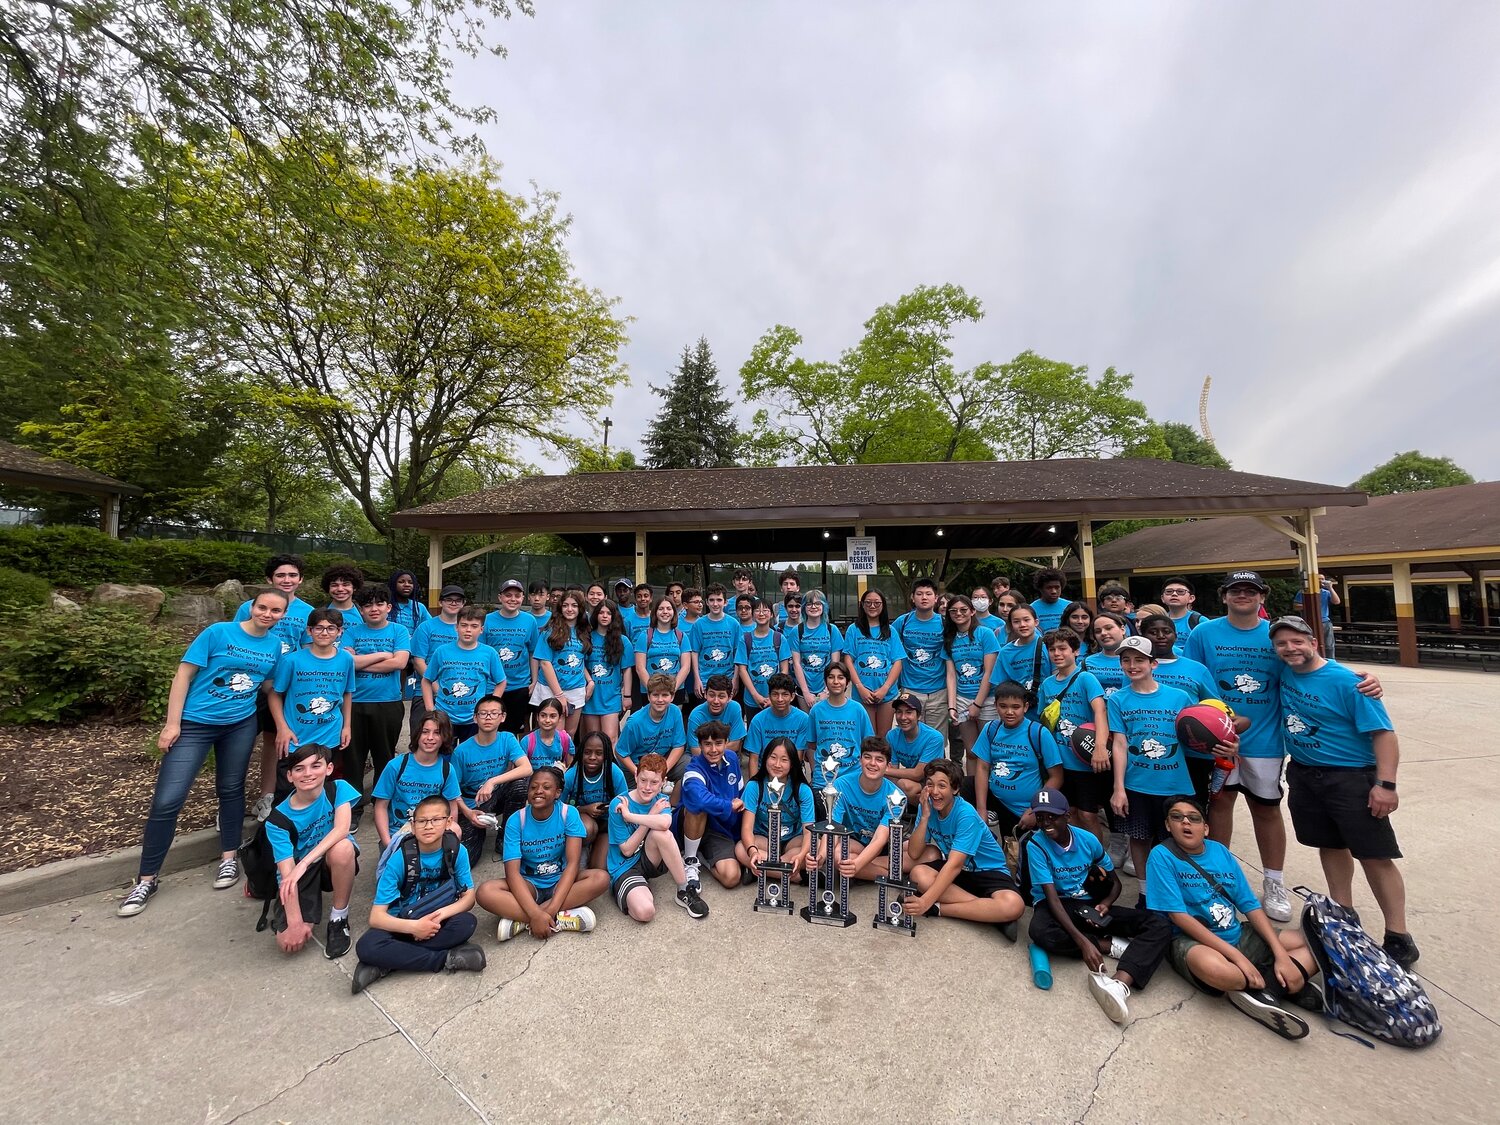 The Woodmere Middle School chamber orchestra and the jazz band took first place in their respective musical categories at the 2023 Dorney Park Music in the Parks Competition in Pennsylvania.